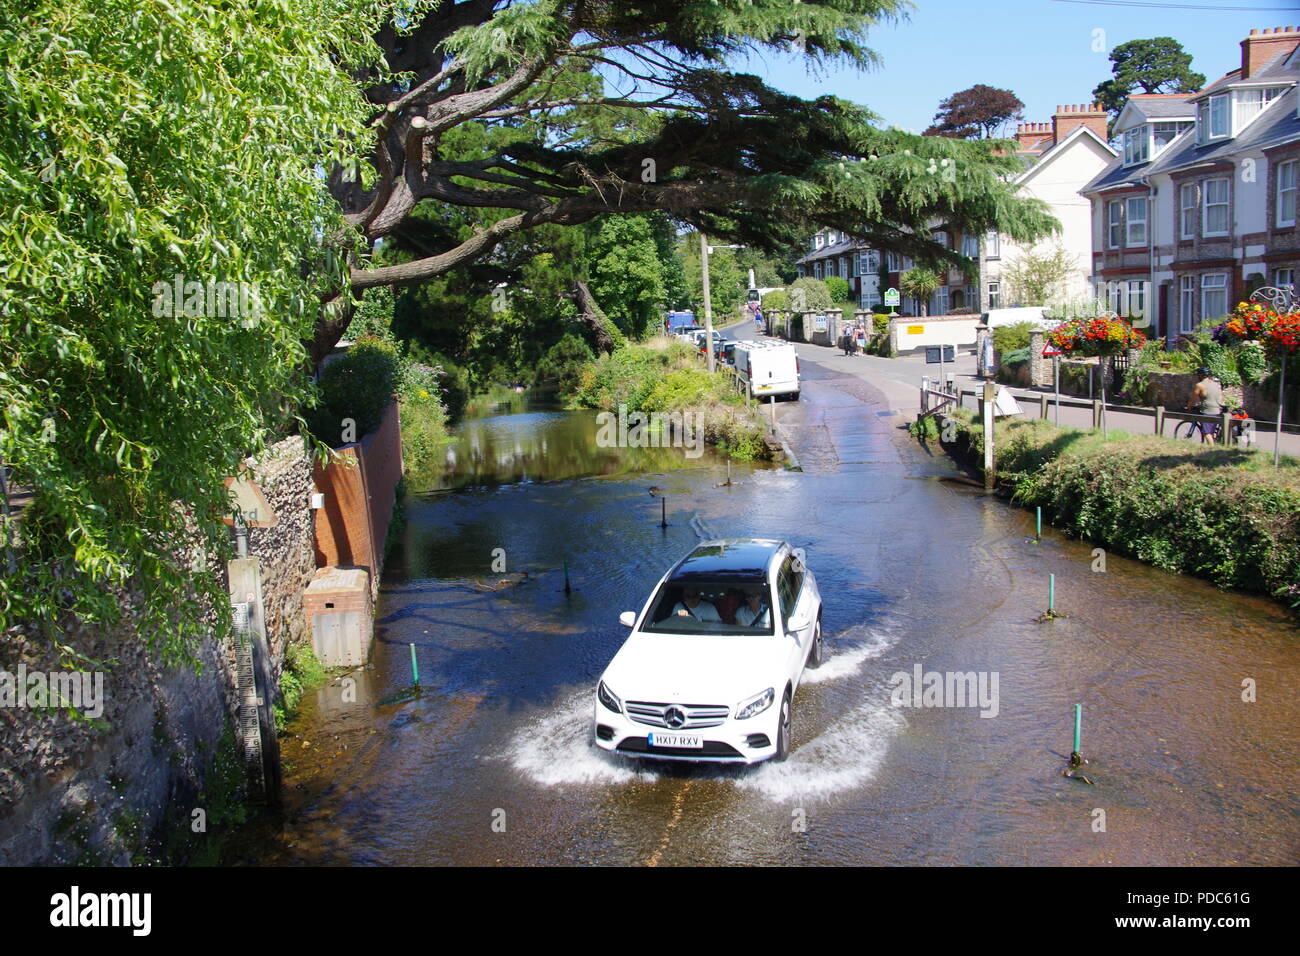 Car Fording the River Sid. East Devon, UK. August, 2018. Stock Photo